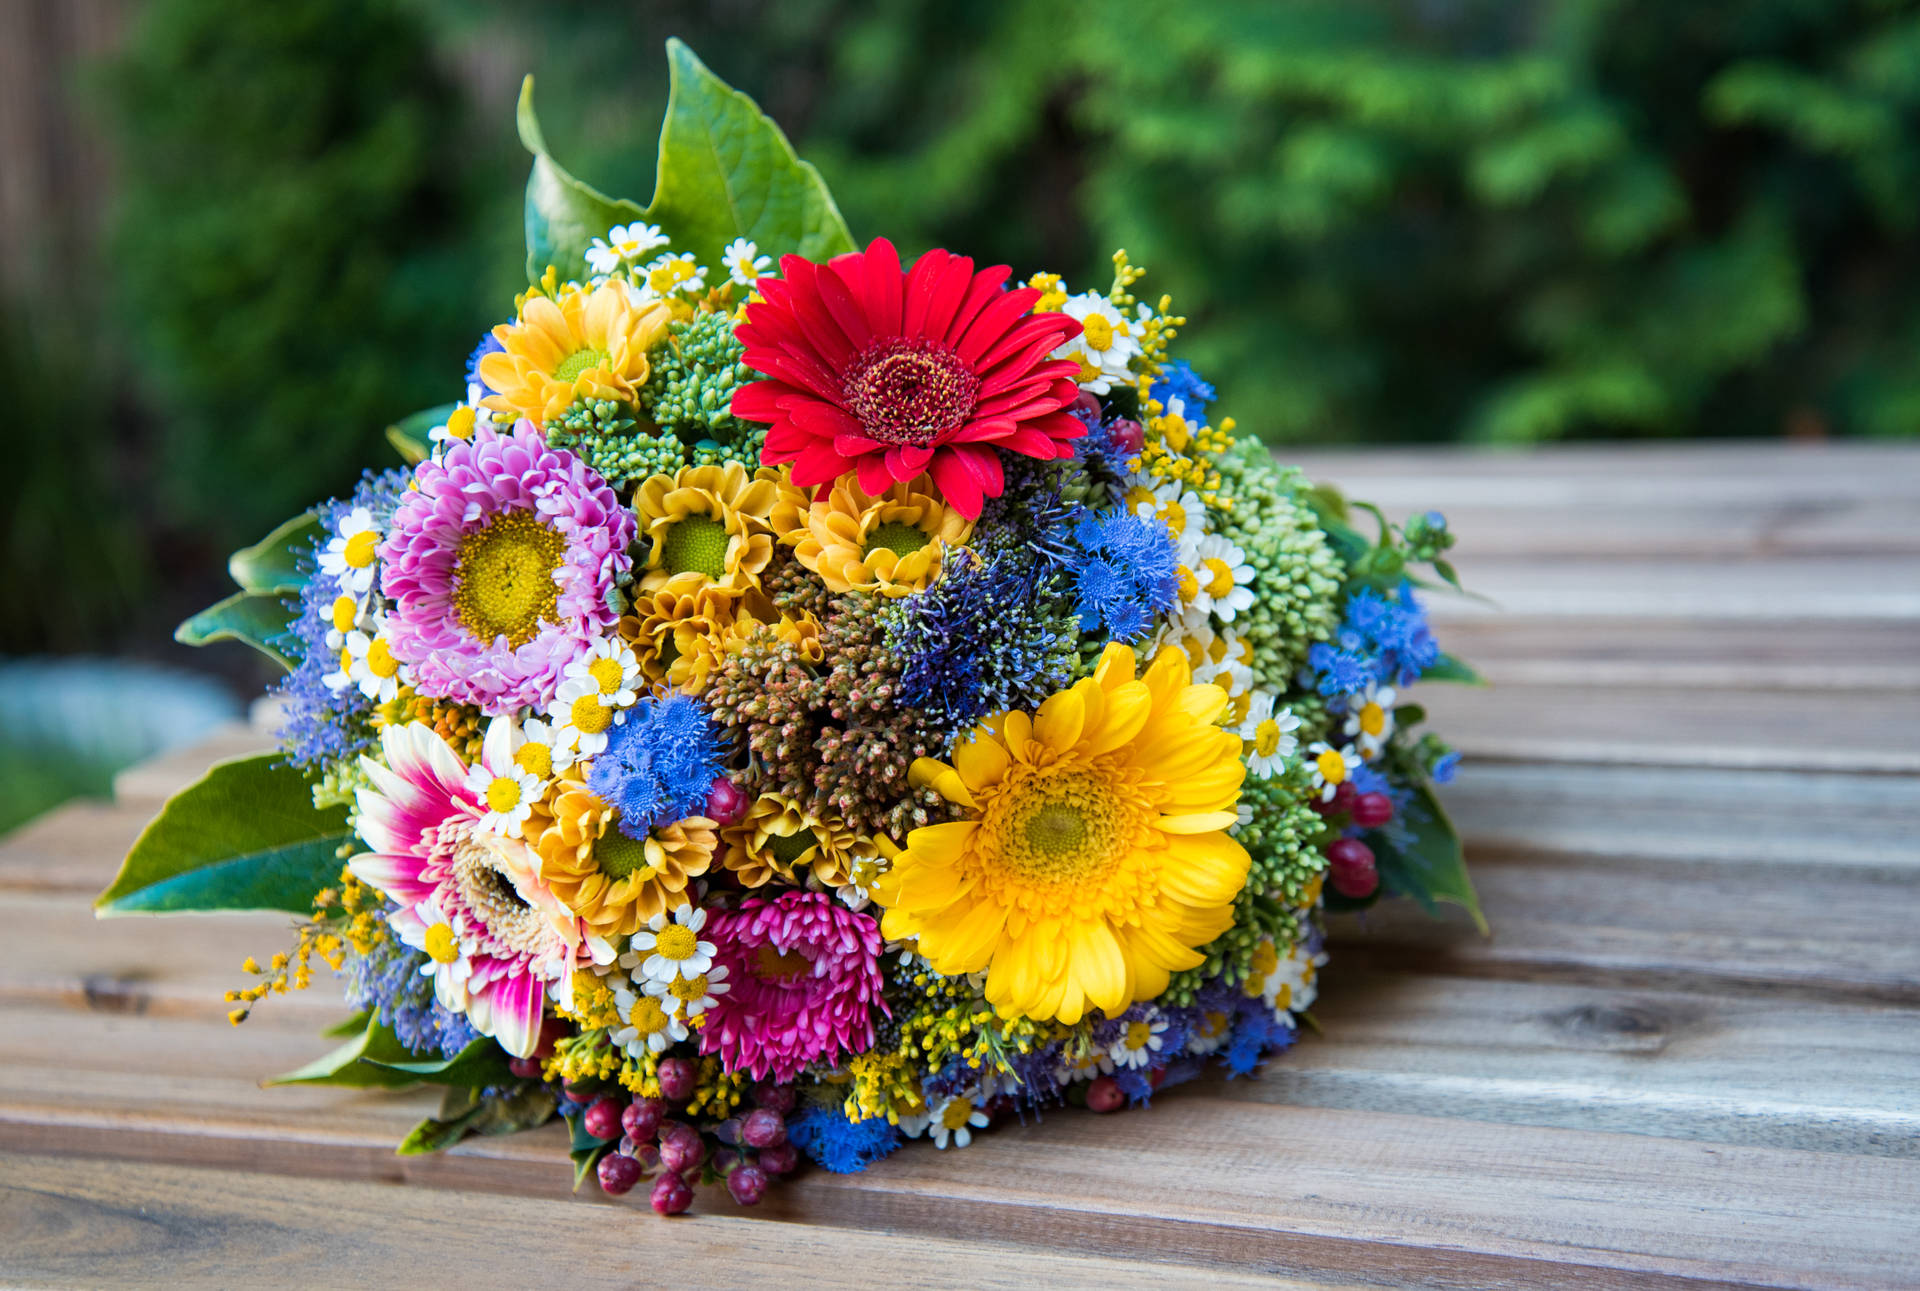 World's Most Beautiful Flowers Colourful Bouquet Background